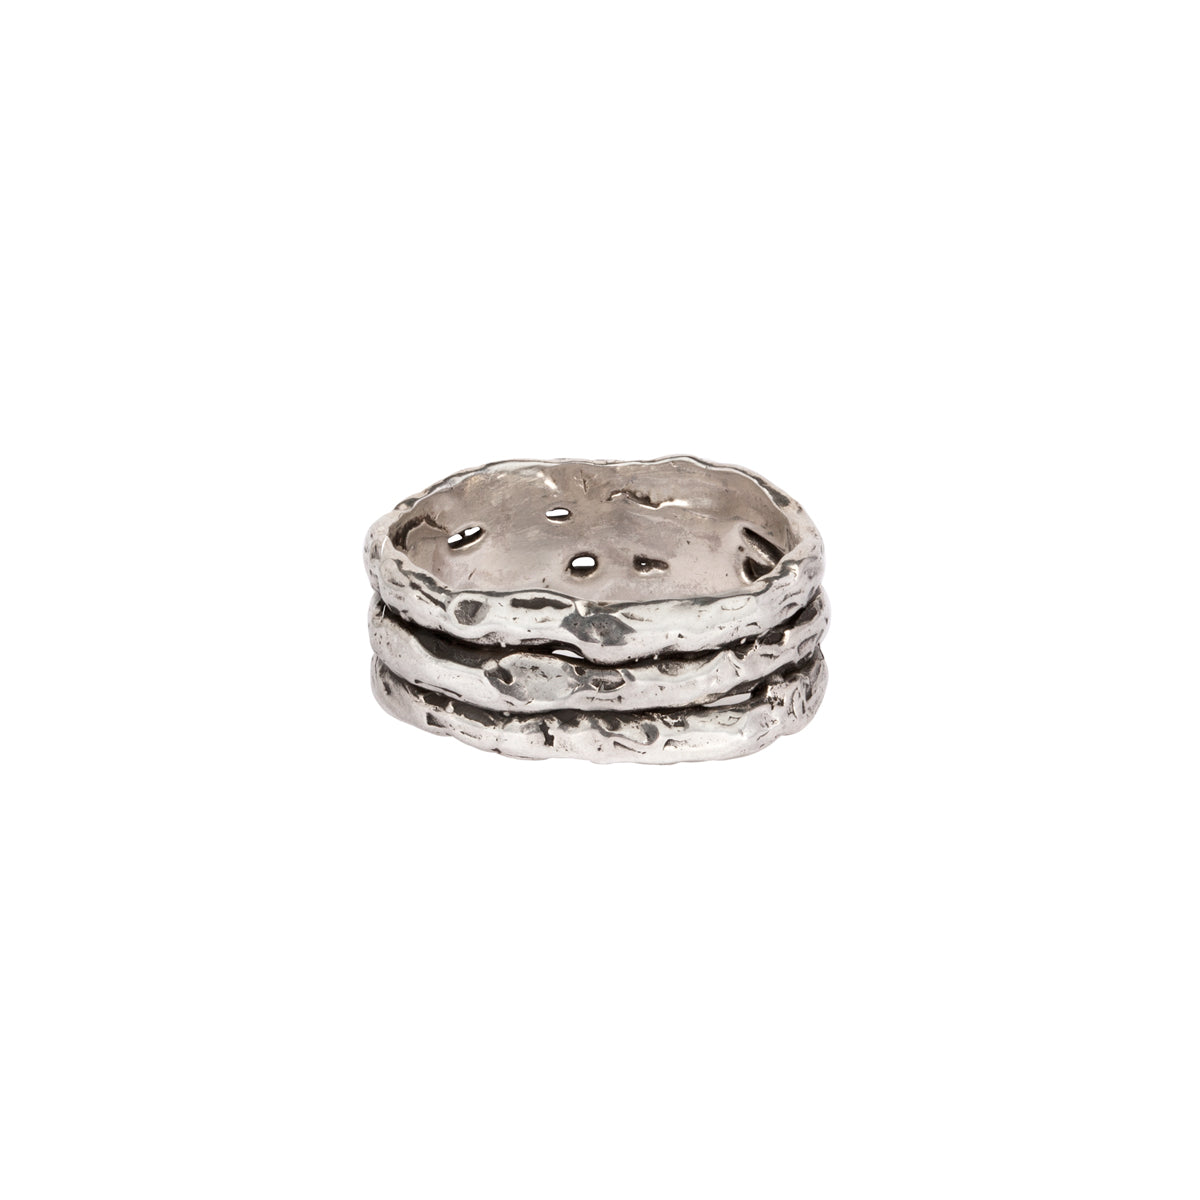 A silver band ring with three textured layers